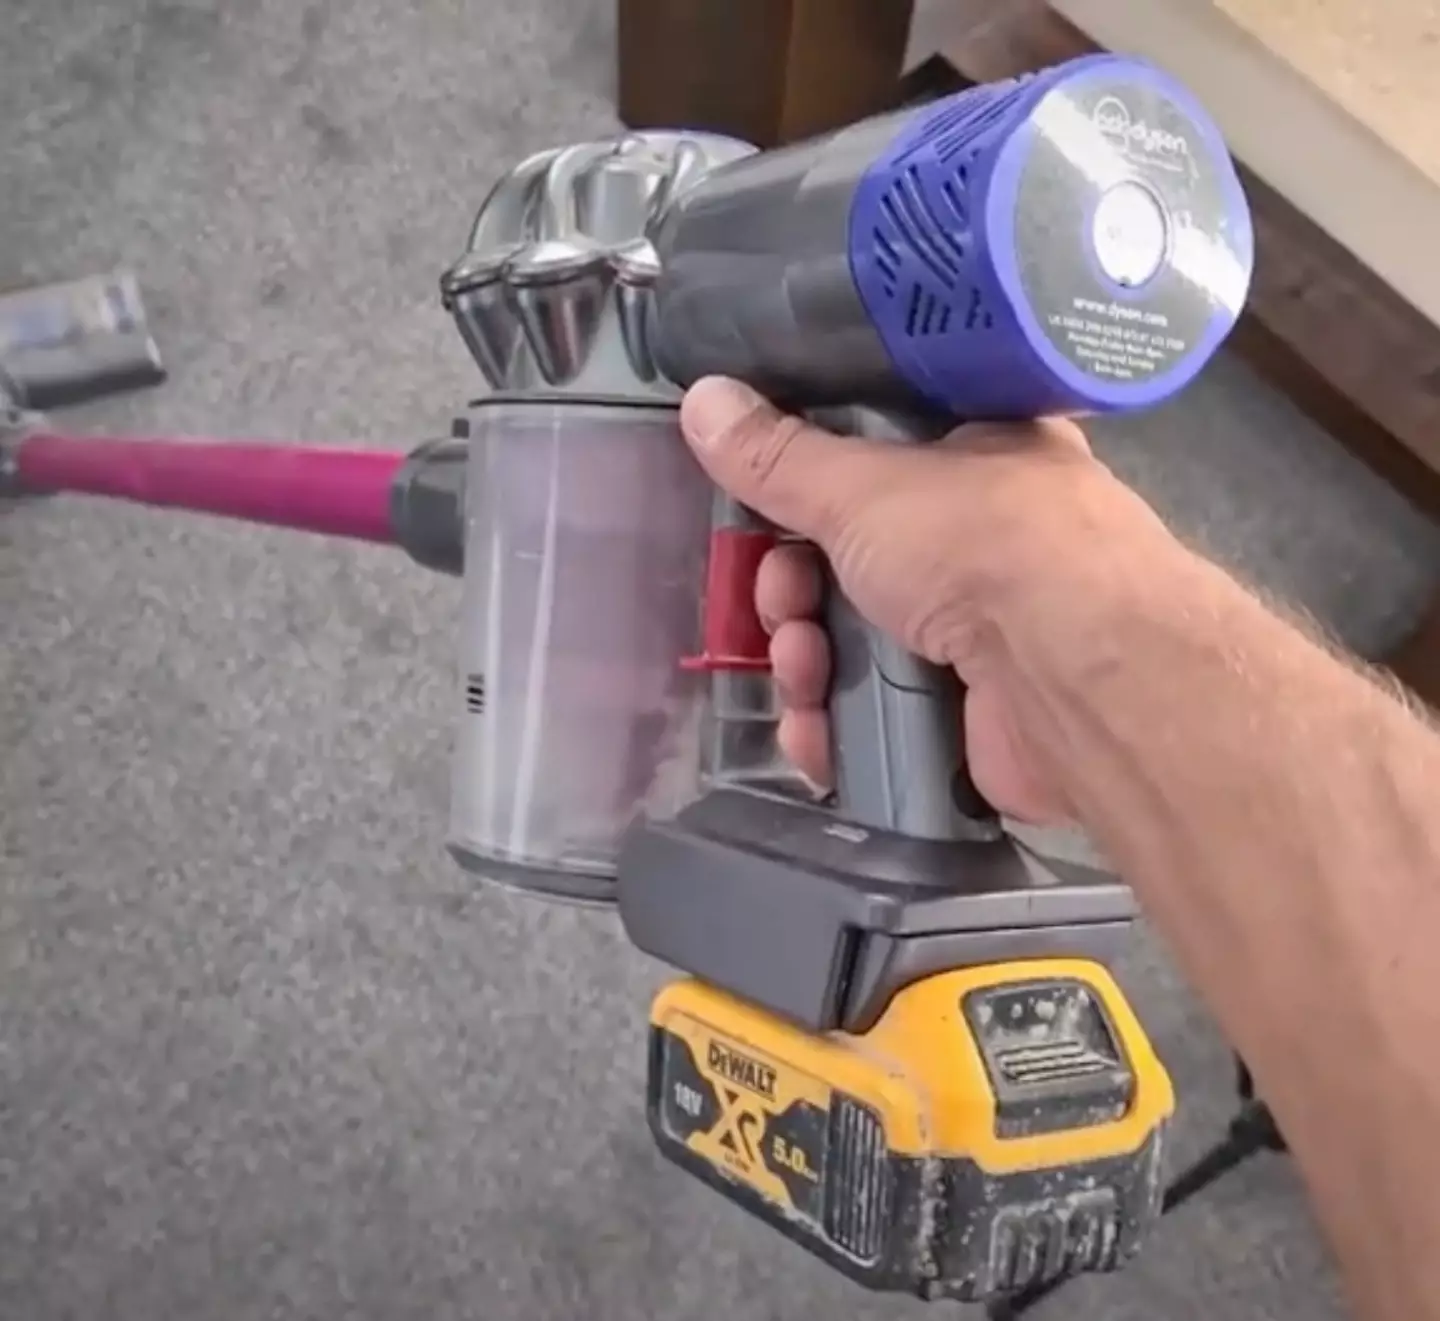 One man has taken to TikTok to show his followers how to get their Dyson hoover battery to last.